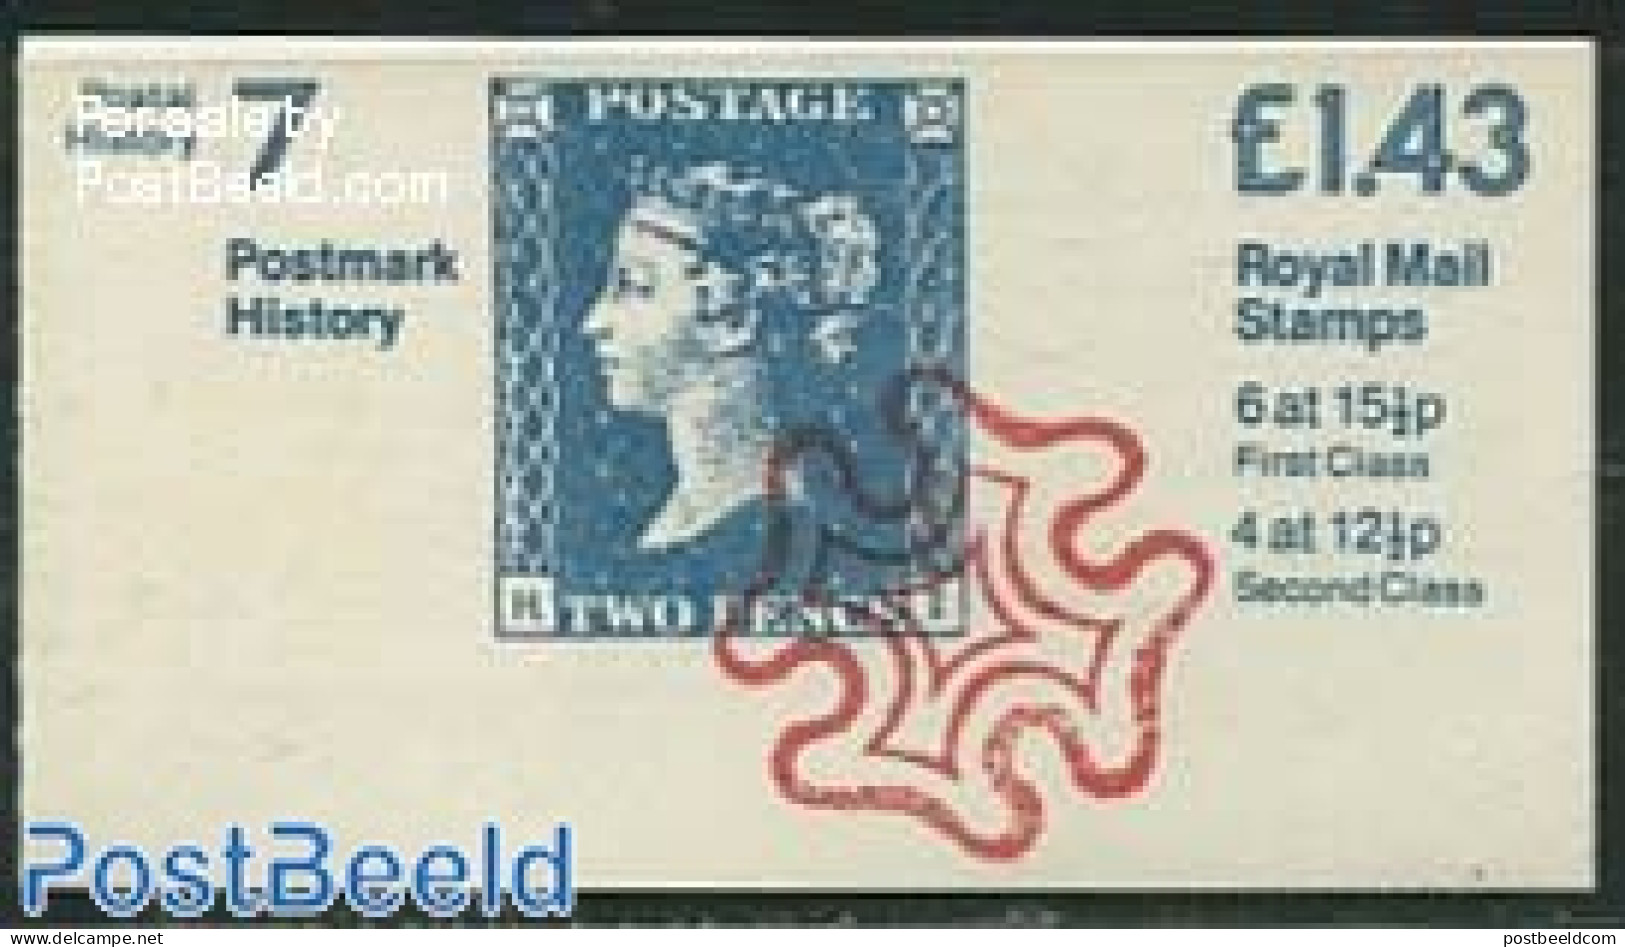 Great Britain 1982 Def. Booklet, Postmark History, Selvedge Right, Mint NH, Stamp Booklets - Stamps On Stamps - Ongebruikt